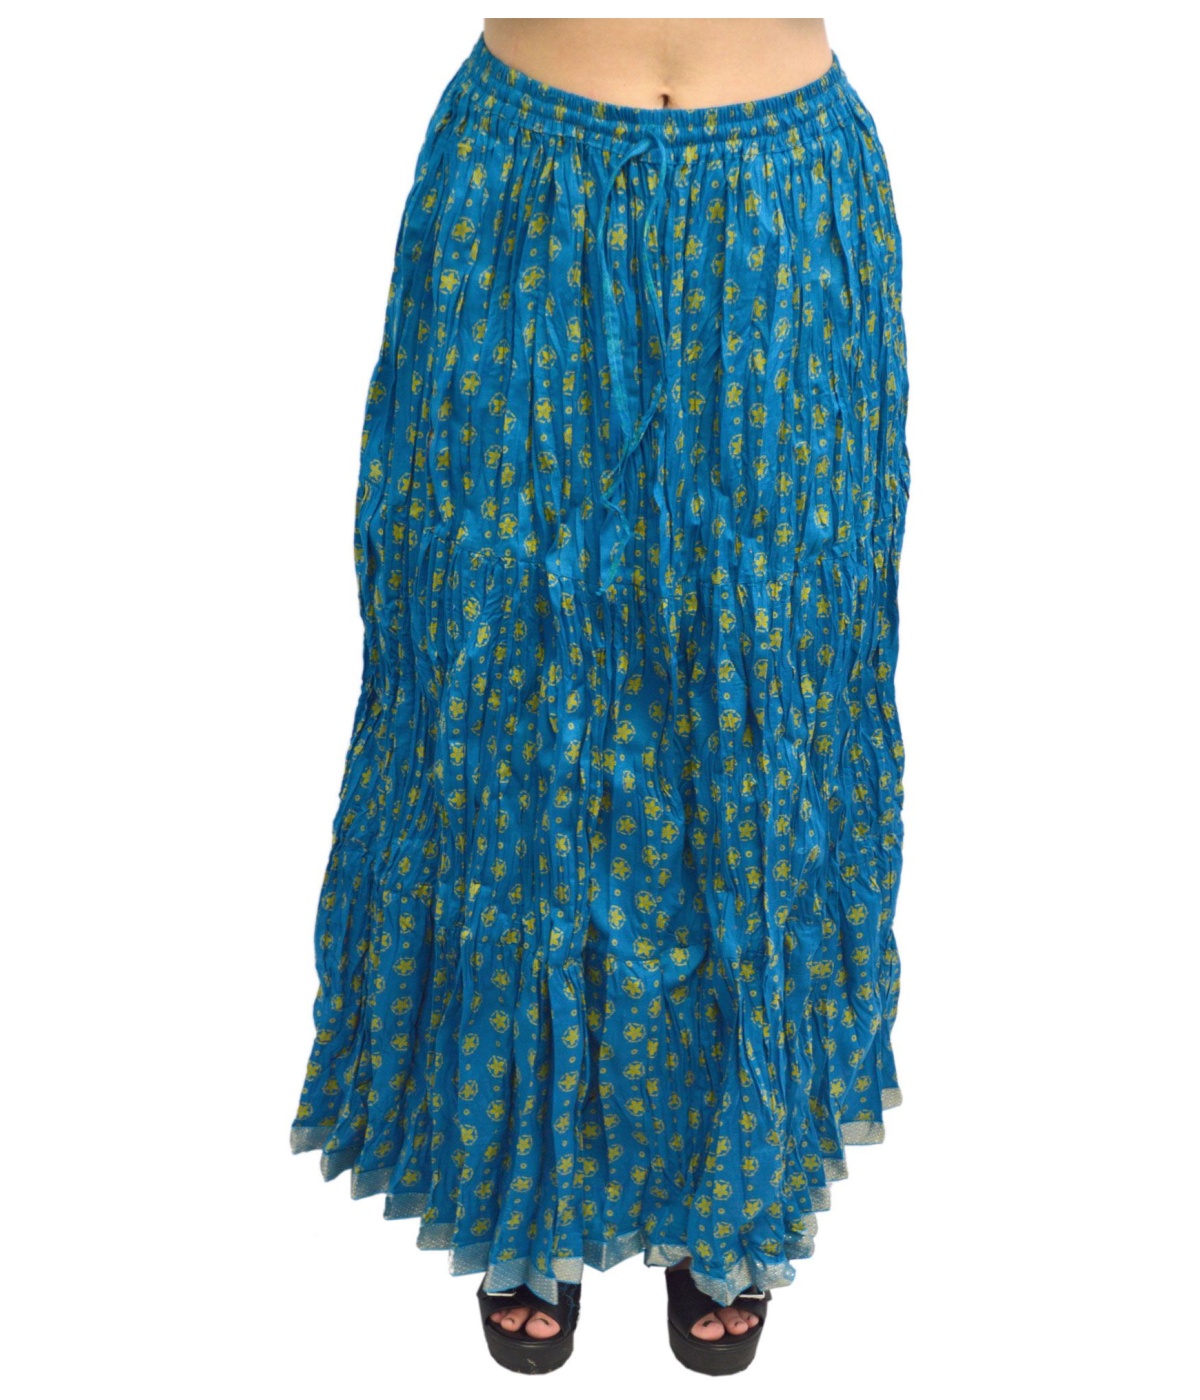 Cotton Turquoise Womens Long Skirt - General Category